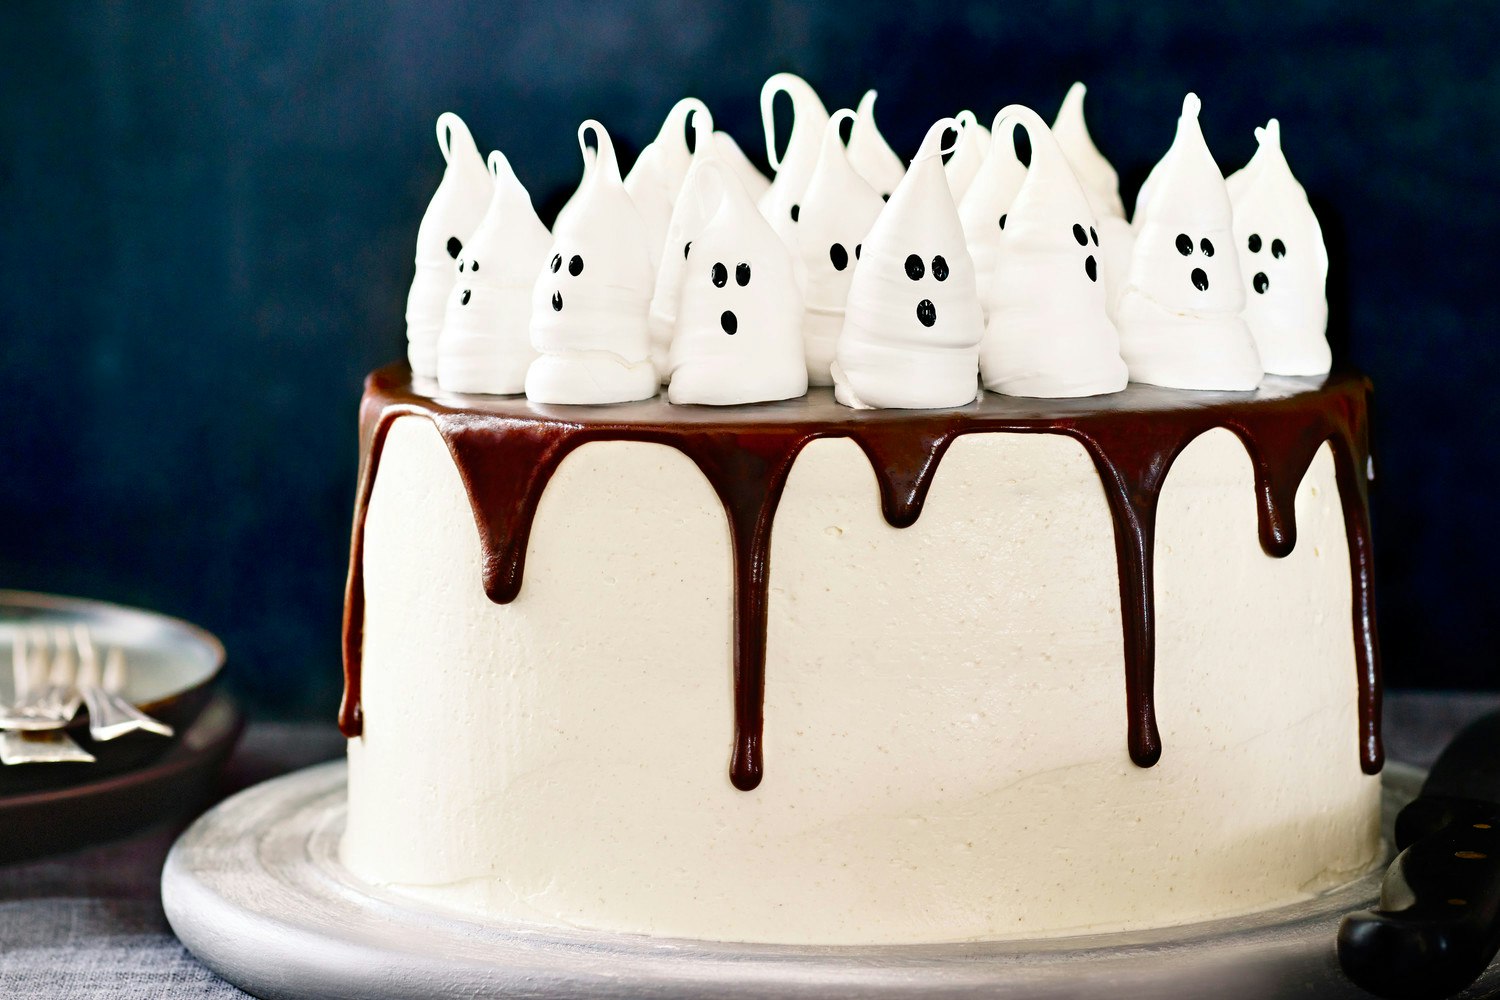 Best Halloween Cakes And Bakes To Make This Year photo